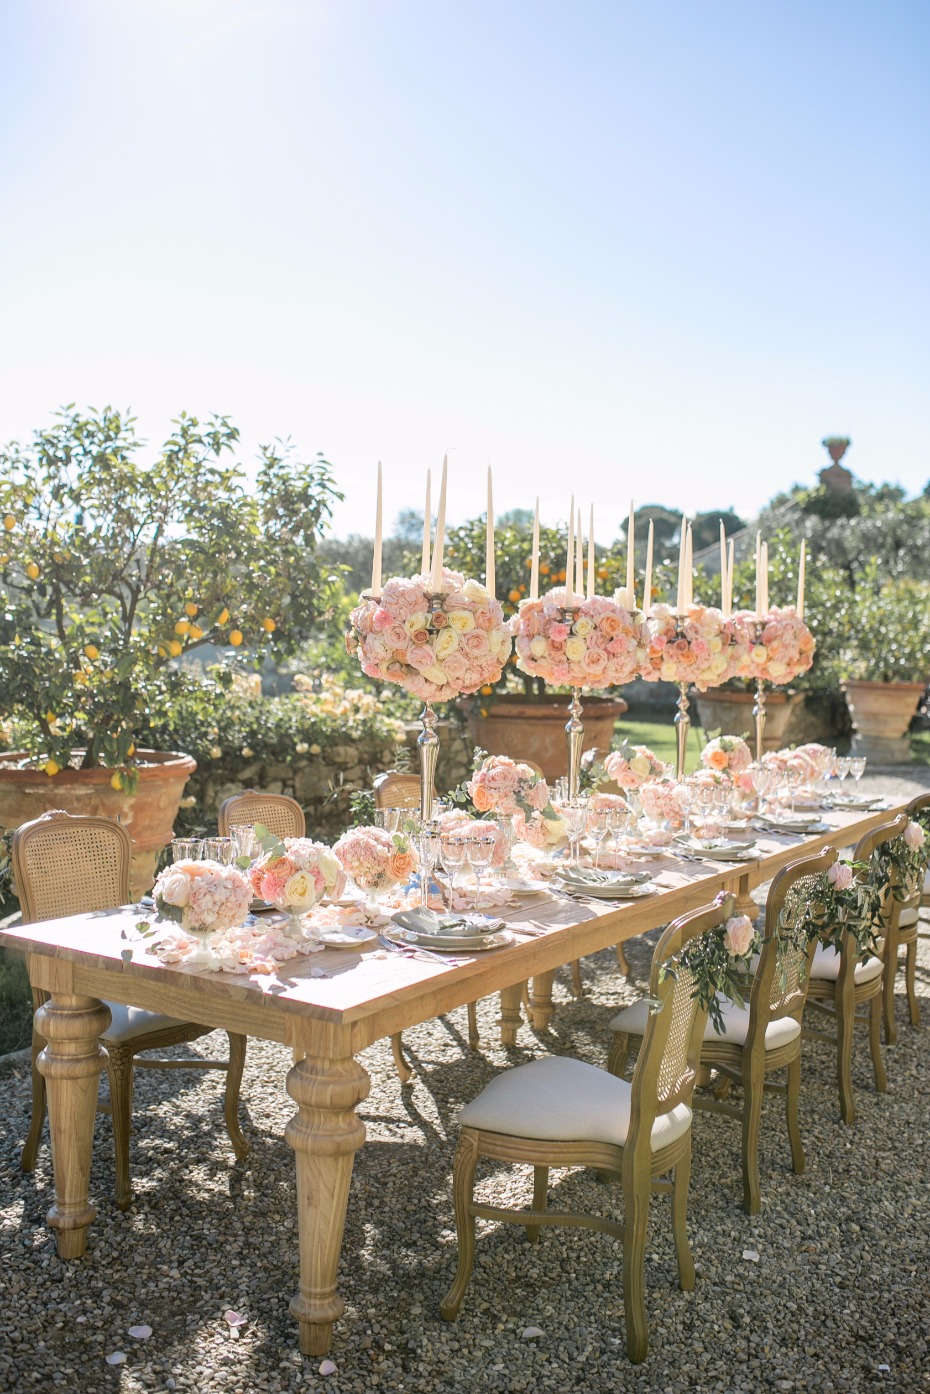 Pink and white table decor